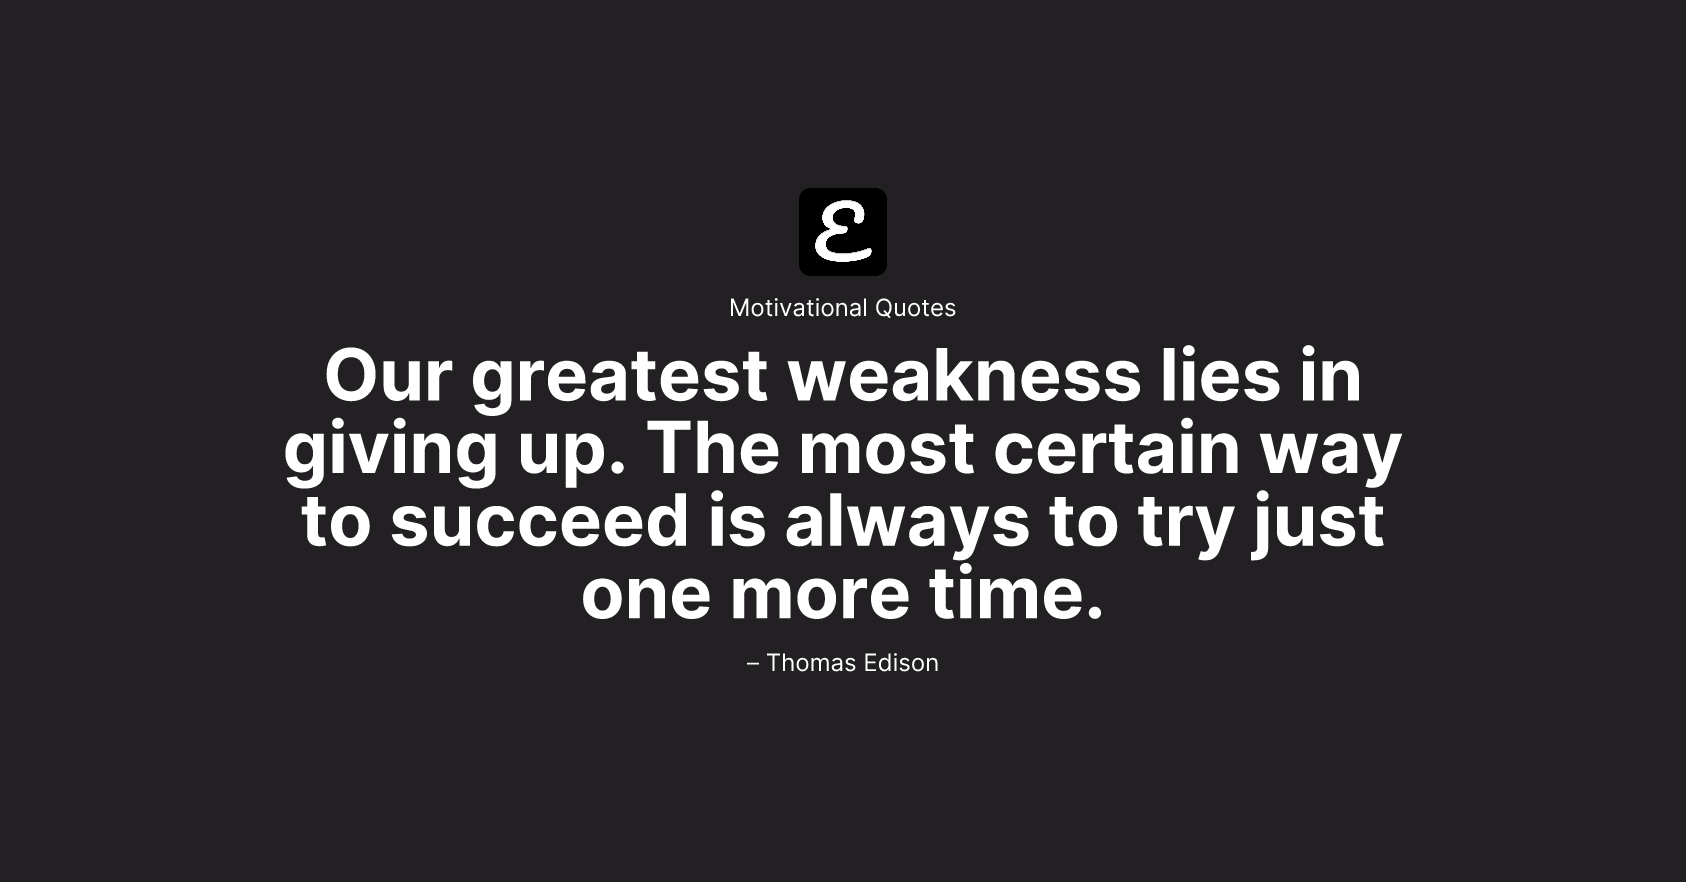 Thomas Edison - Our greatest weakness lies in giving up. The most certain way to succeed is always to try just one more time.